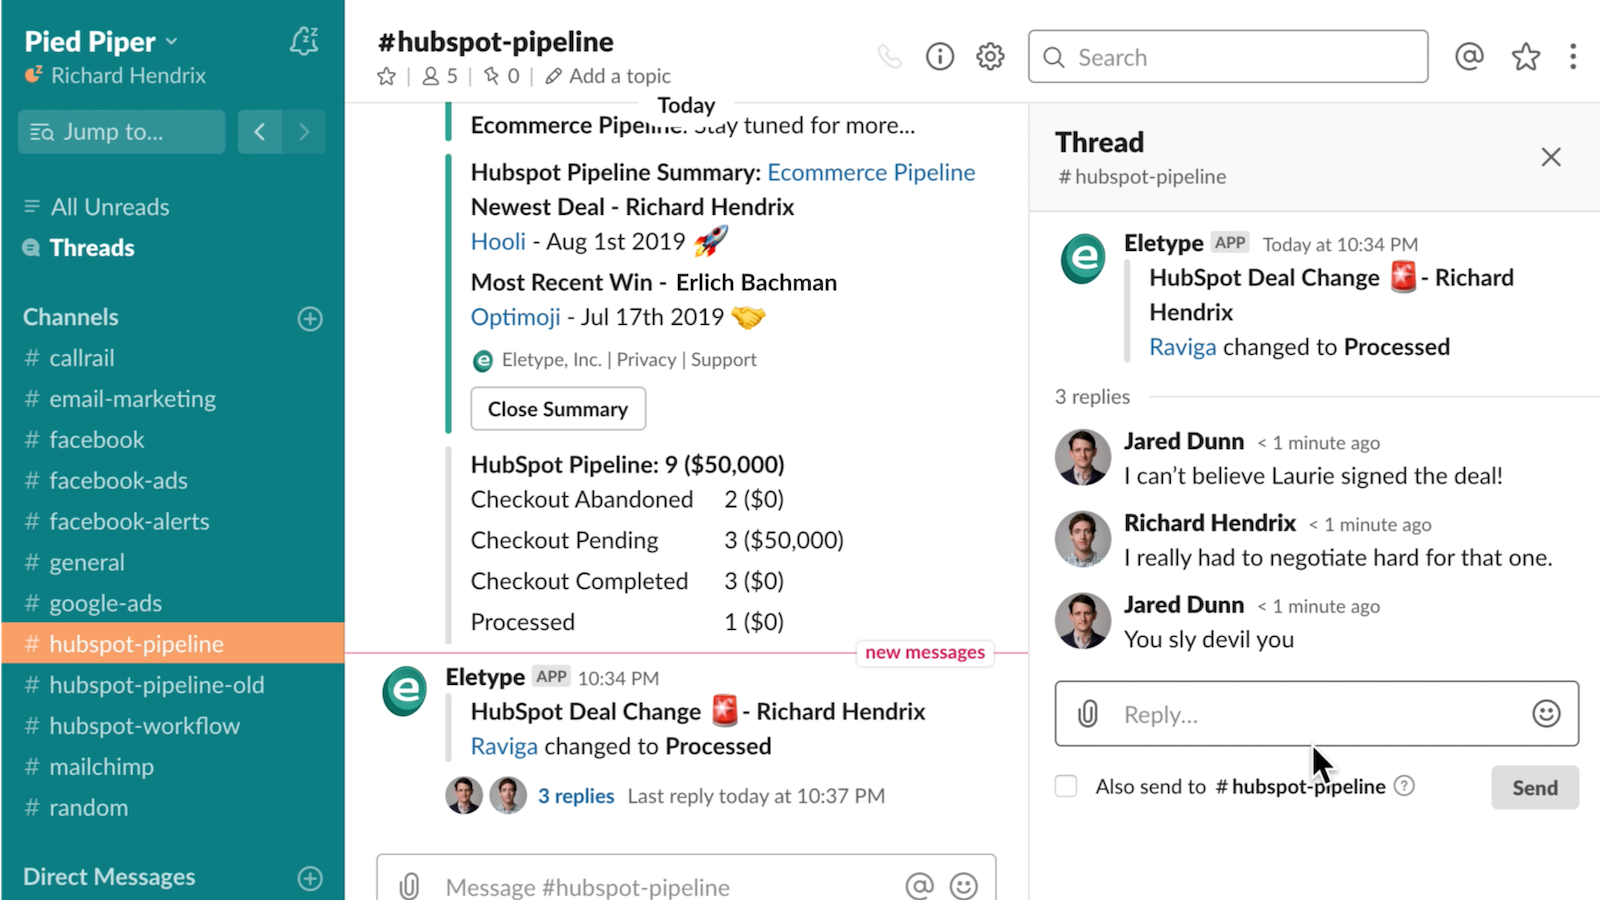 Get realtime deal change notifications and then discuss with your team.